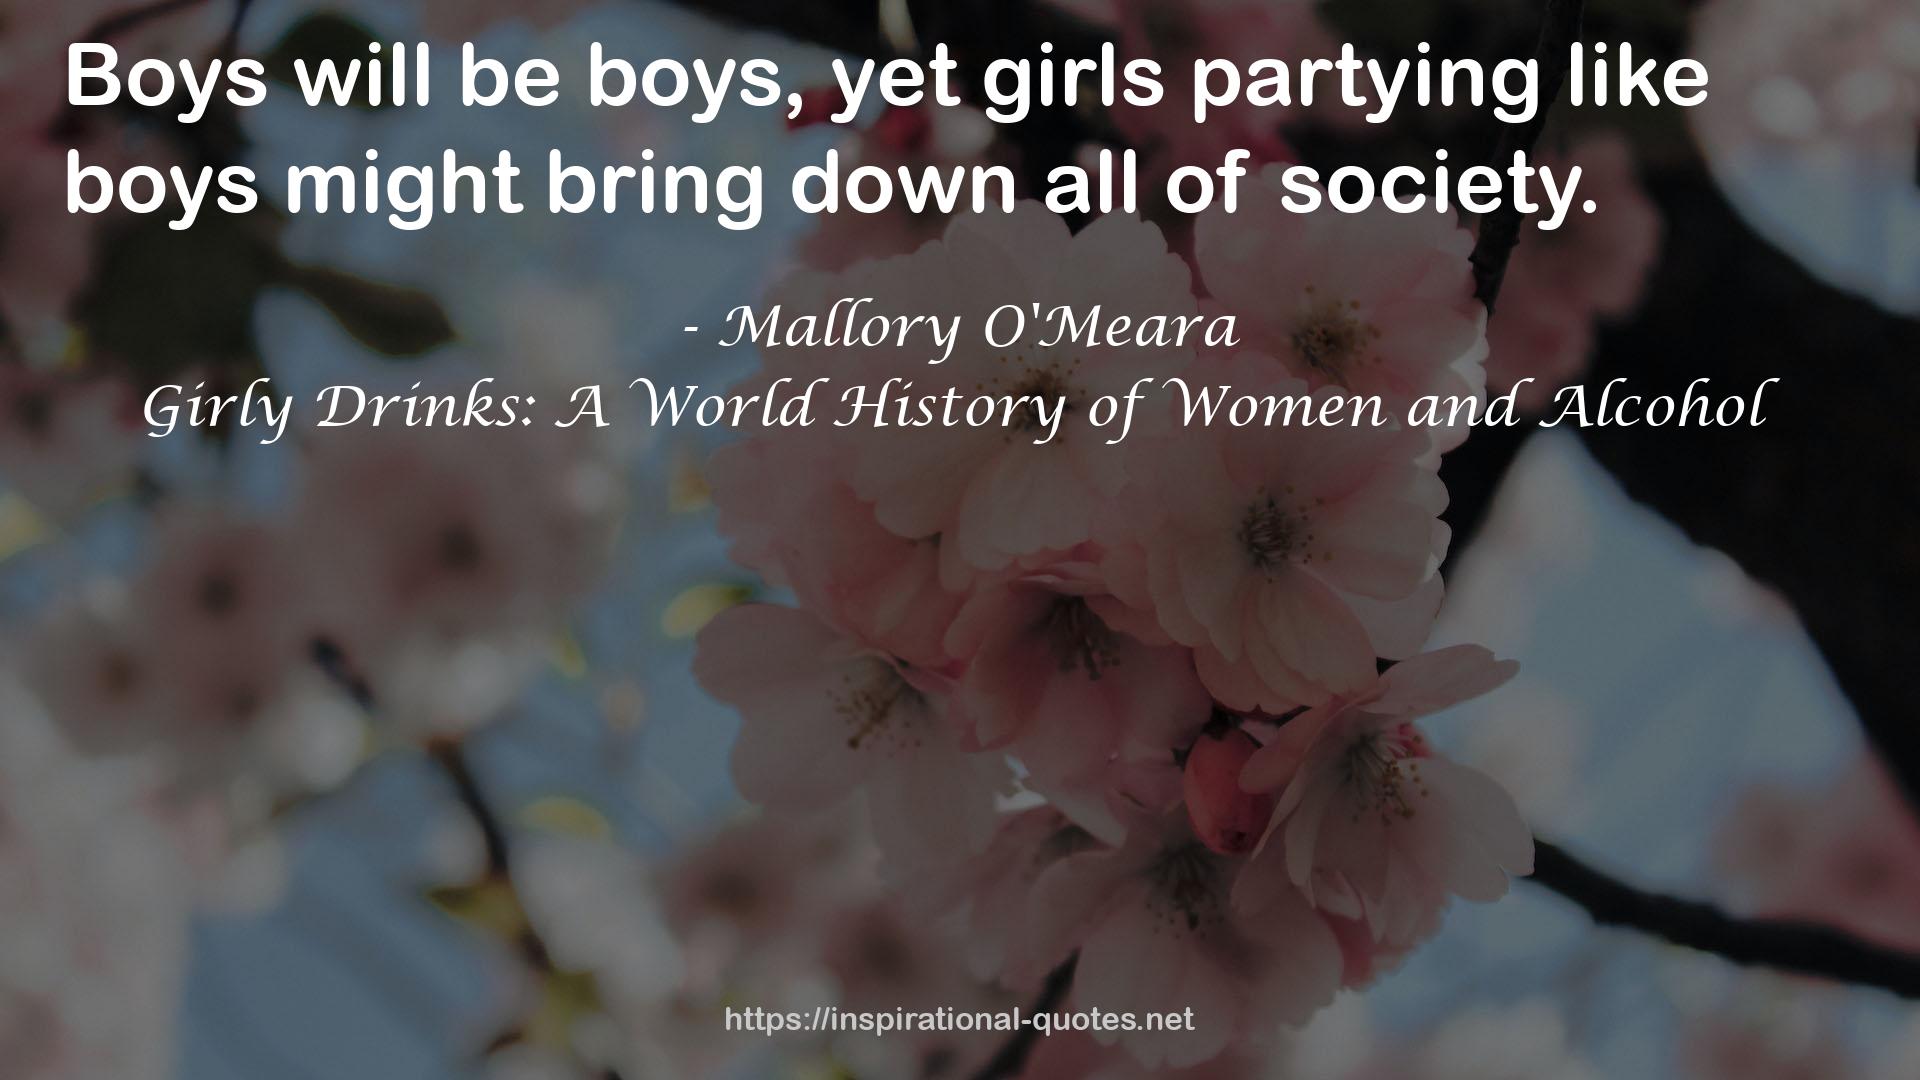 Girly Drinks: A World History of Women and Alcohol QUOTES